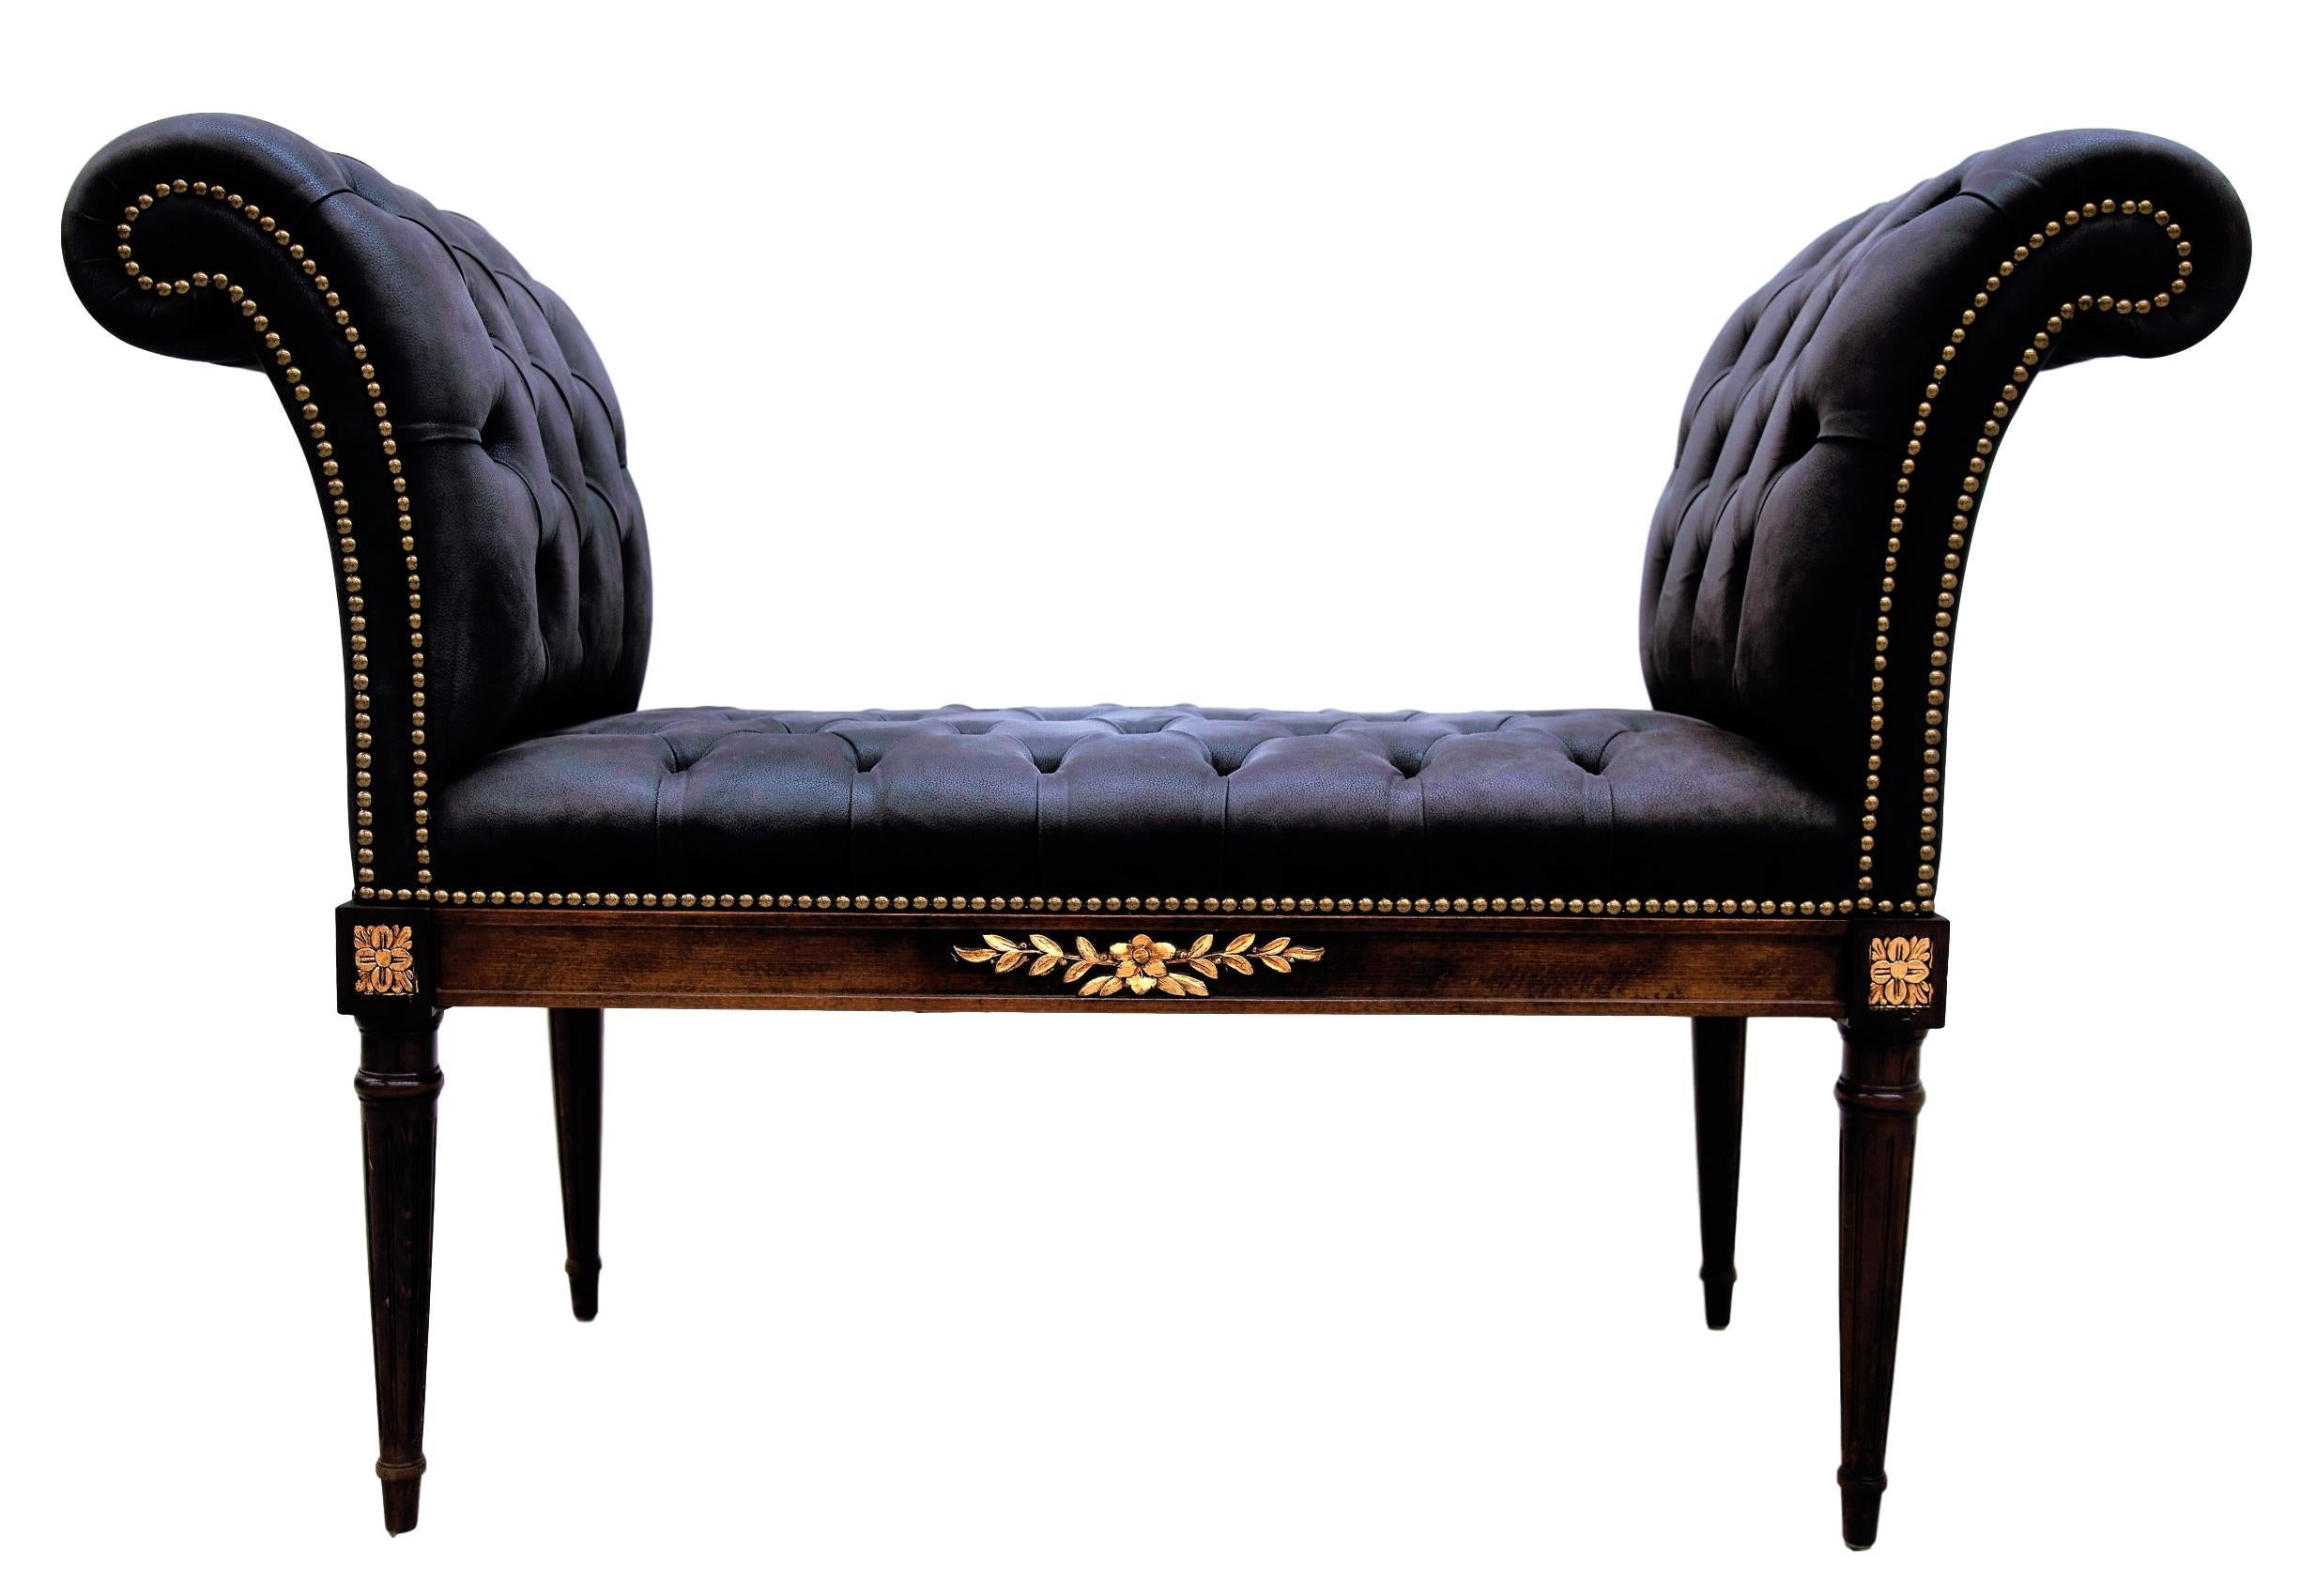 Crafted in Italy, this traditional French Louis XVI and neoclassical style banquette, window seat or daybed features rolled arm curved sides, the typical carved and tapered legs with golden leaf giltwood decoration medallions at each corner and in